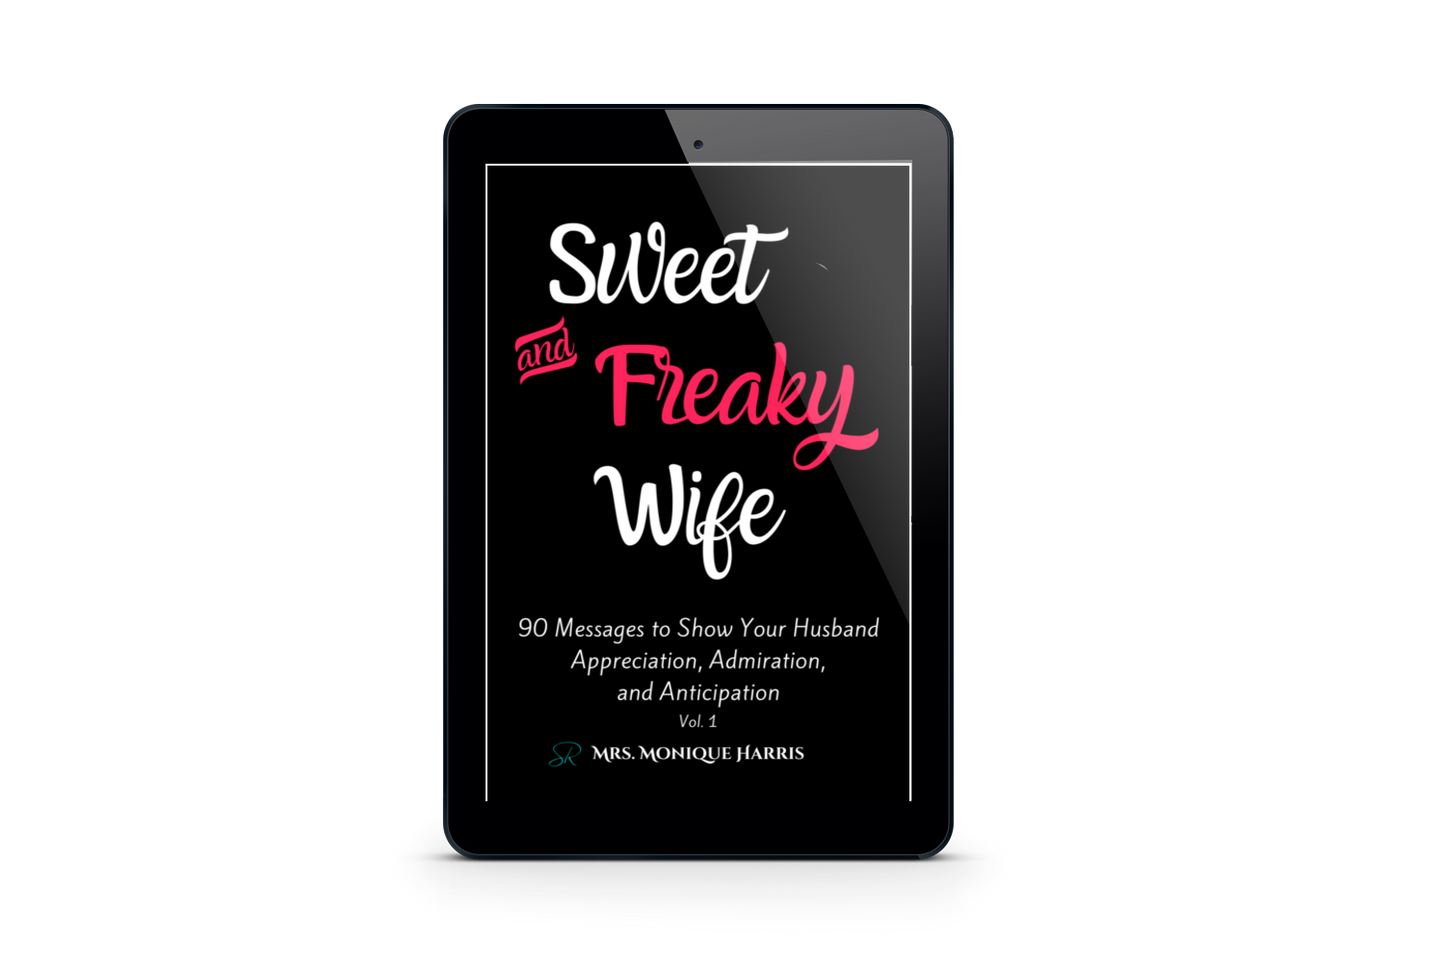 eBook Sweet and Freaky Wife™: 90 Messages to Show Your Husband Appreciation, Admiration, and Anticipation Vol. 1